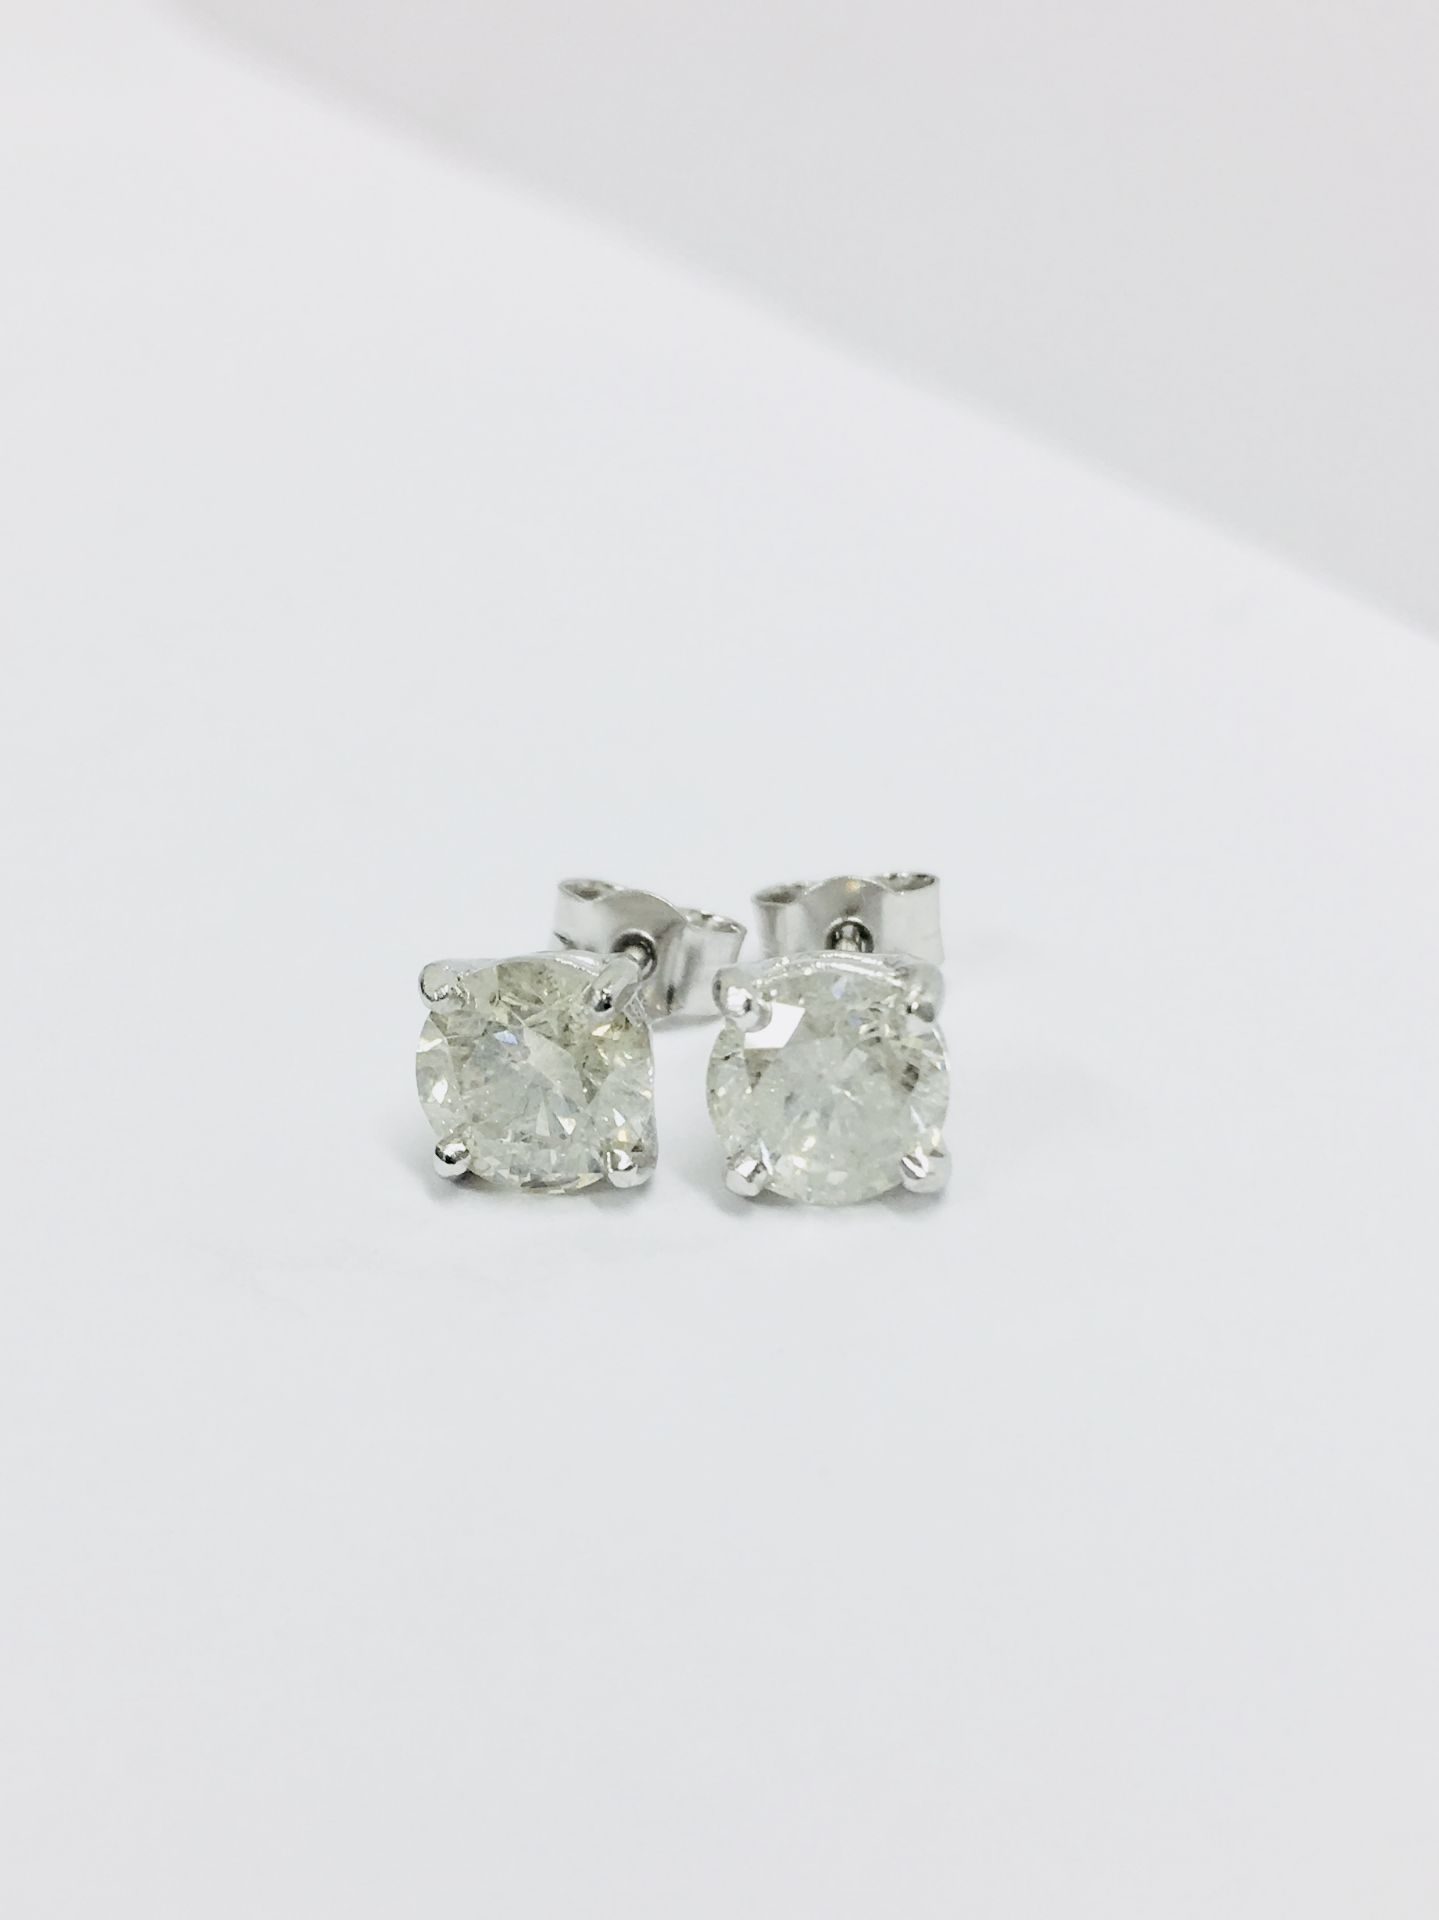 2.00Ct Solitaire Diamond Stud Earrings Set With Brilliant Cut Diamonds Which Have Been Enhanced. - Image 5 of 19